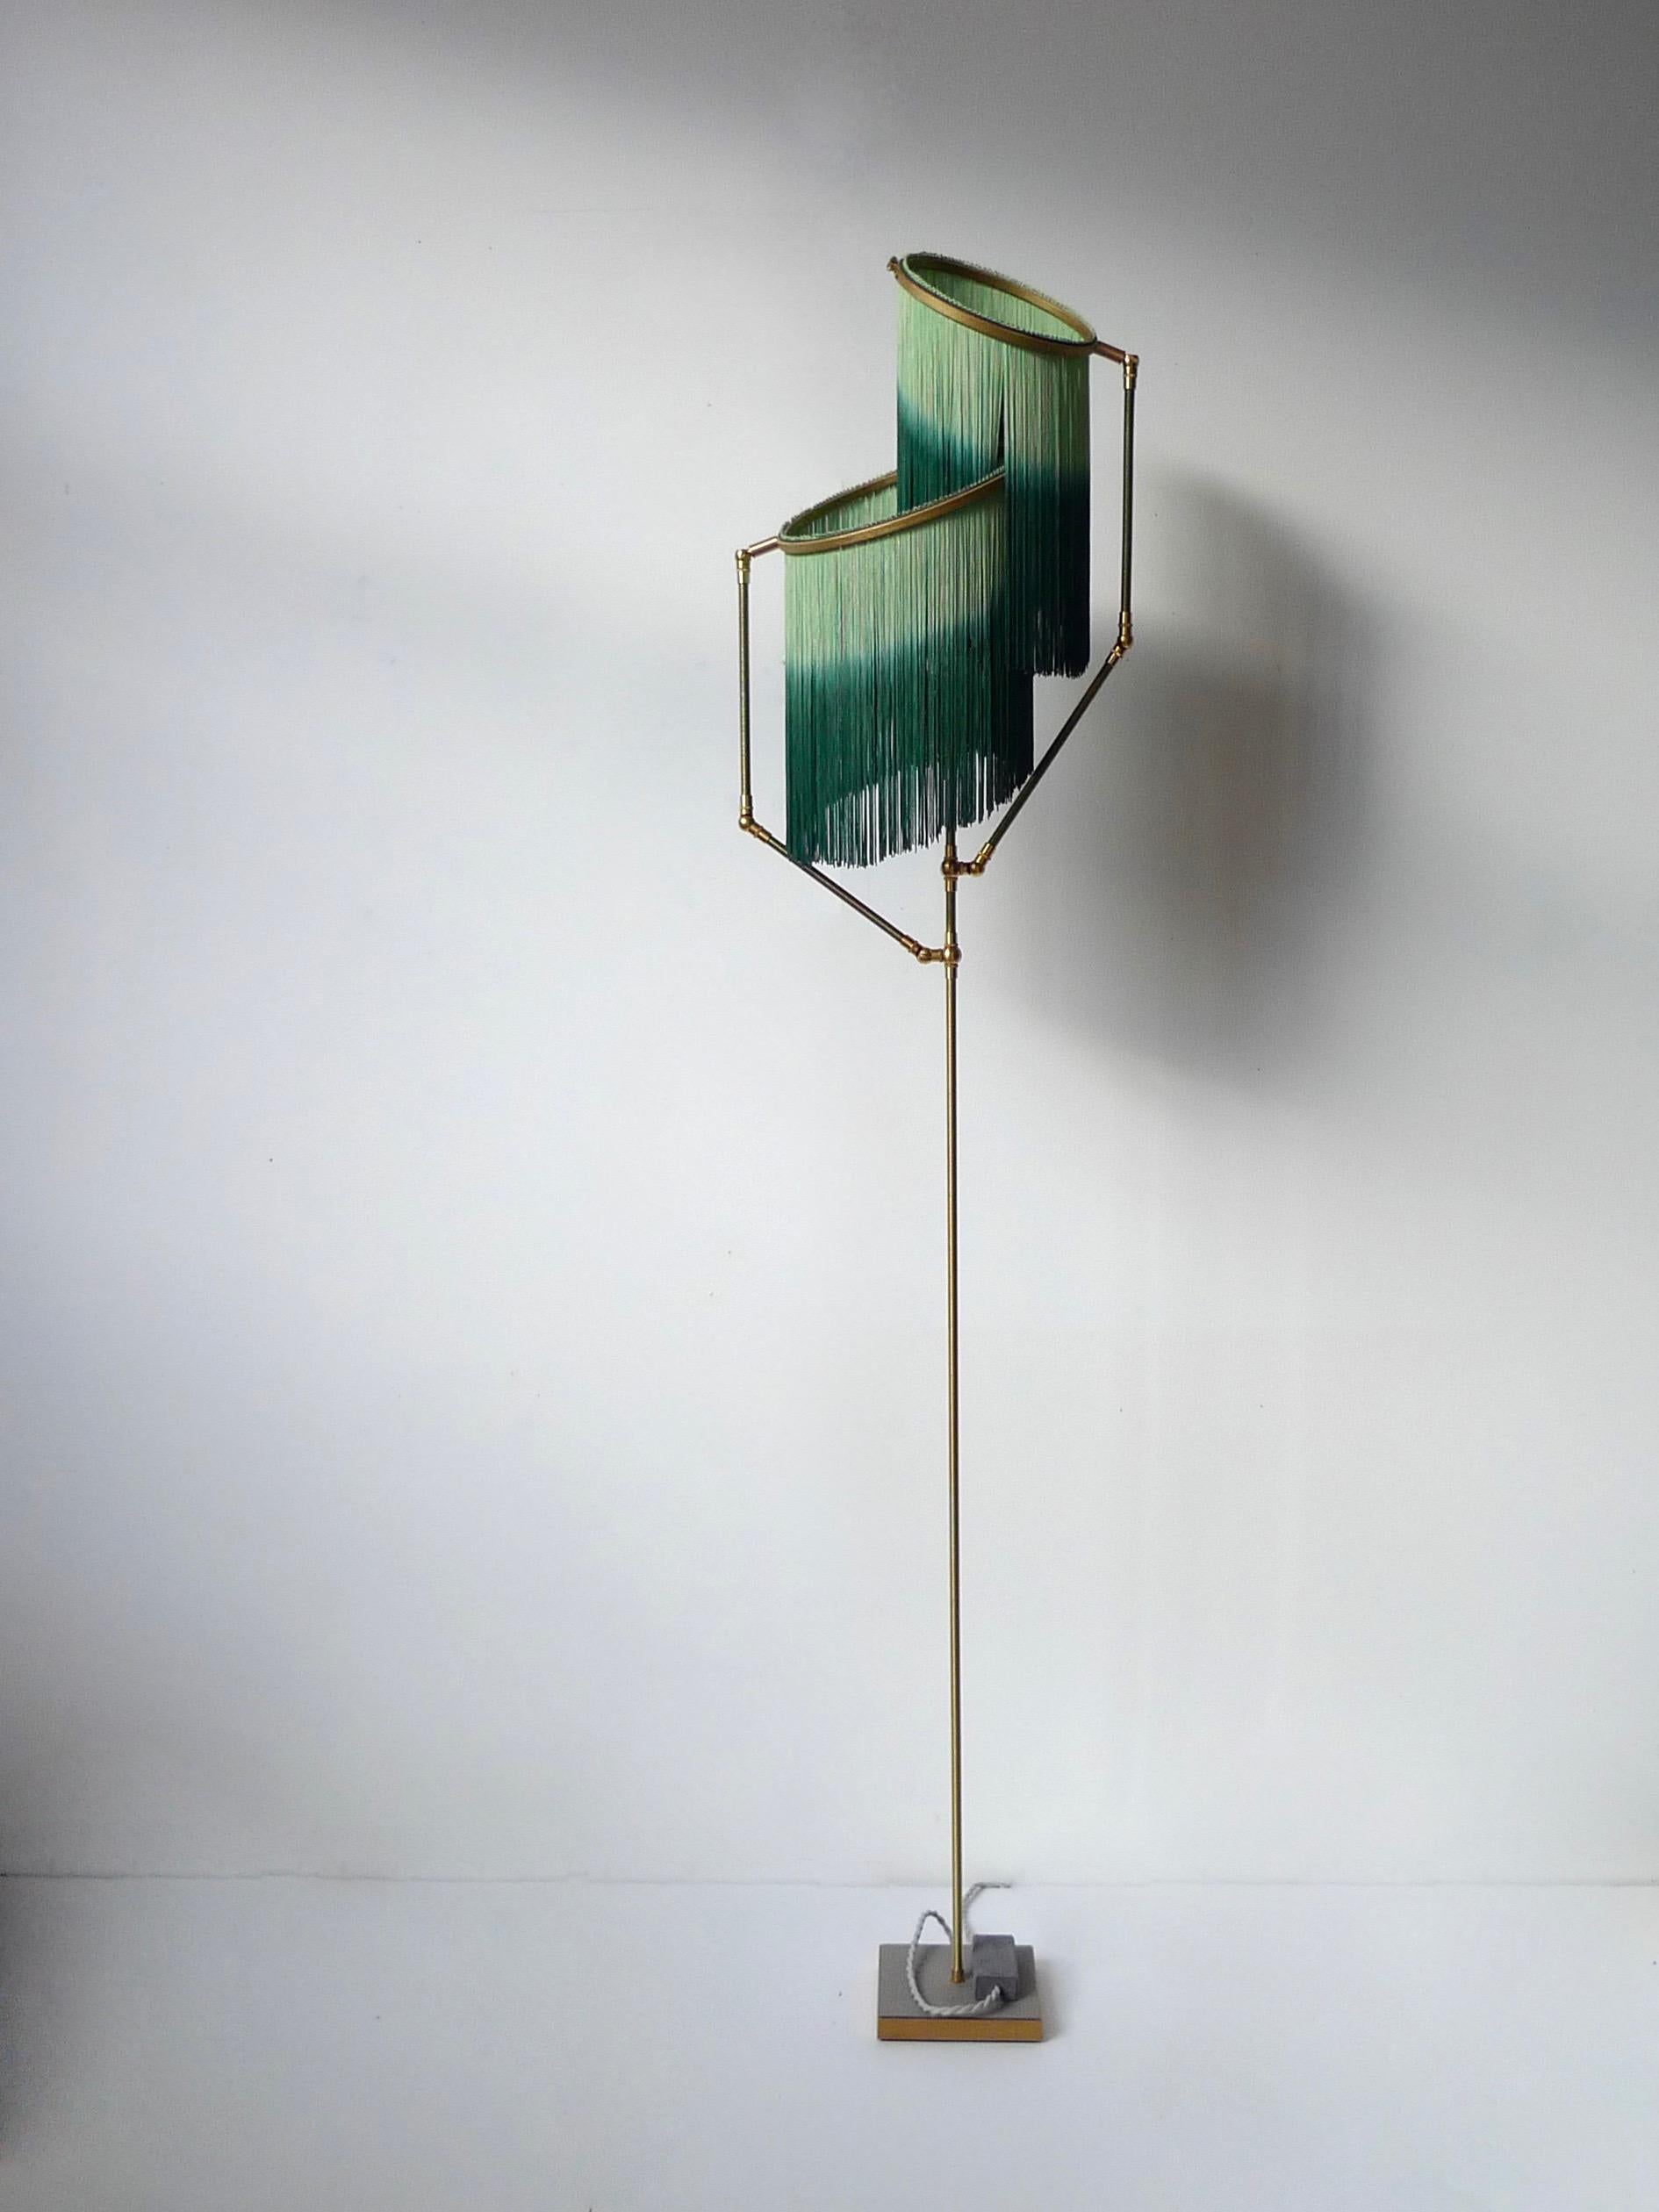 Green charme floor lamp, Sander Bottinga

Dimensions: H 153 x W 38 x D 25 cm

Handmade in brass, leather, wood and dip dyed colored Fringes in viscose.
The movable arms makes it possible to move the circles with fringes in different positions.
So